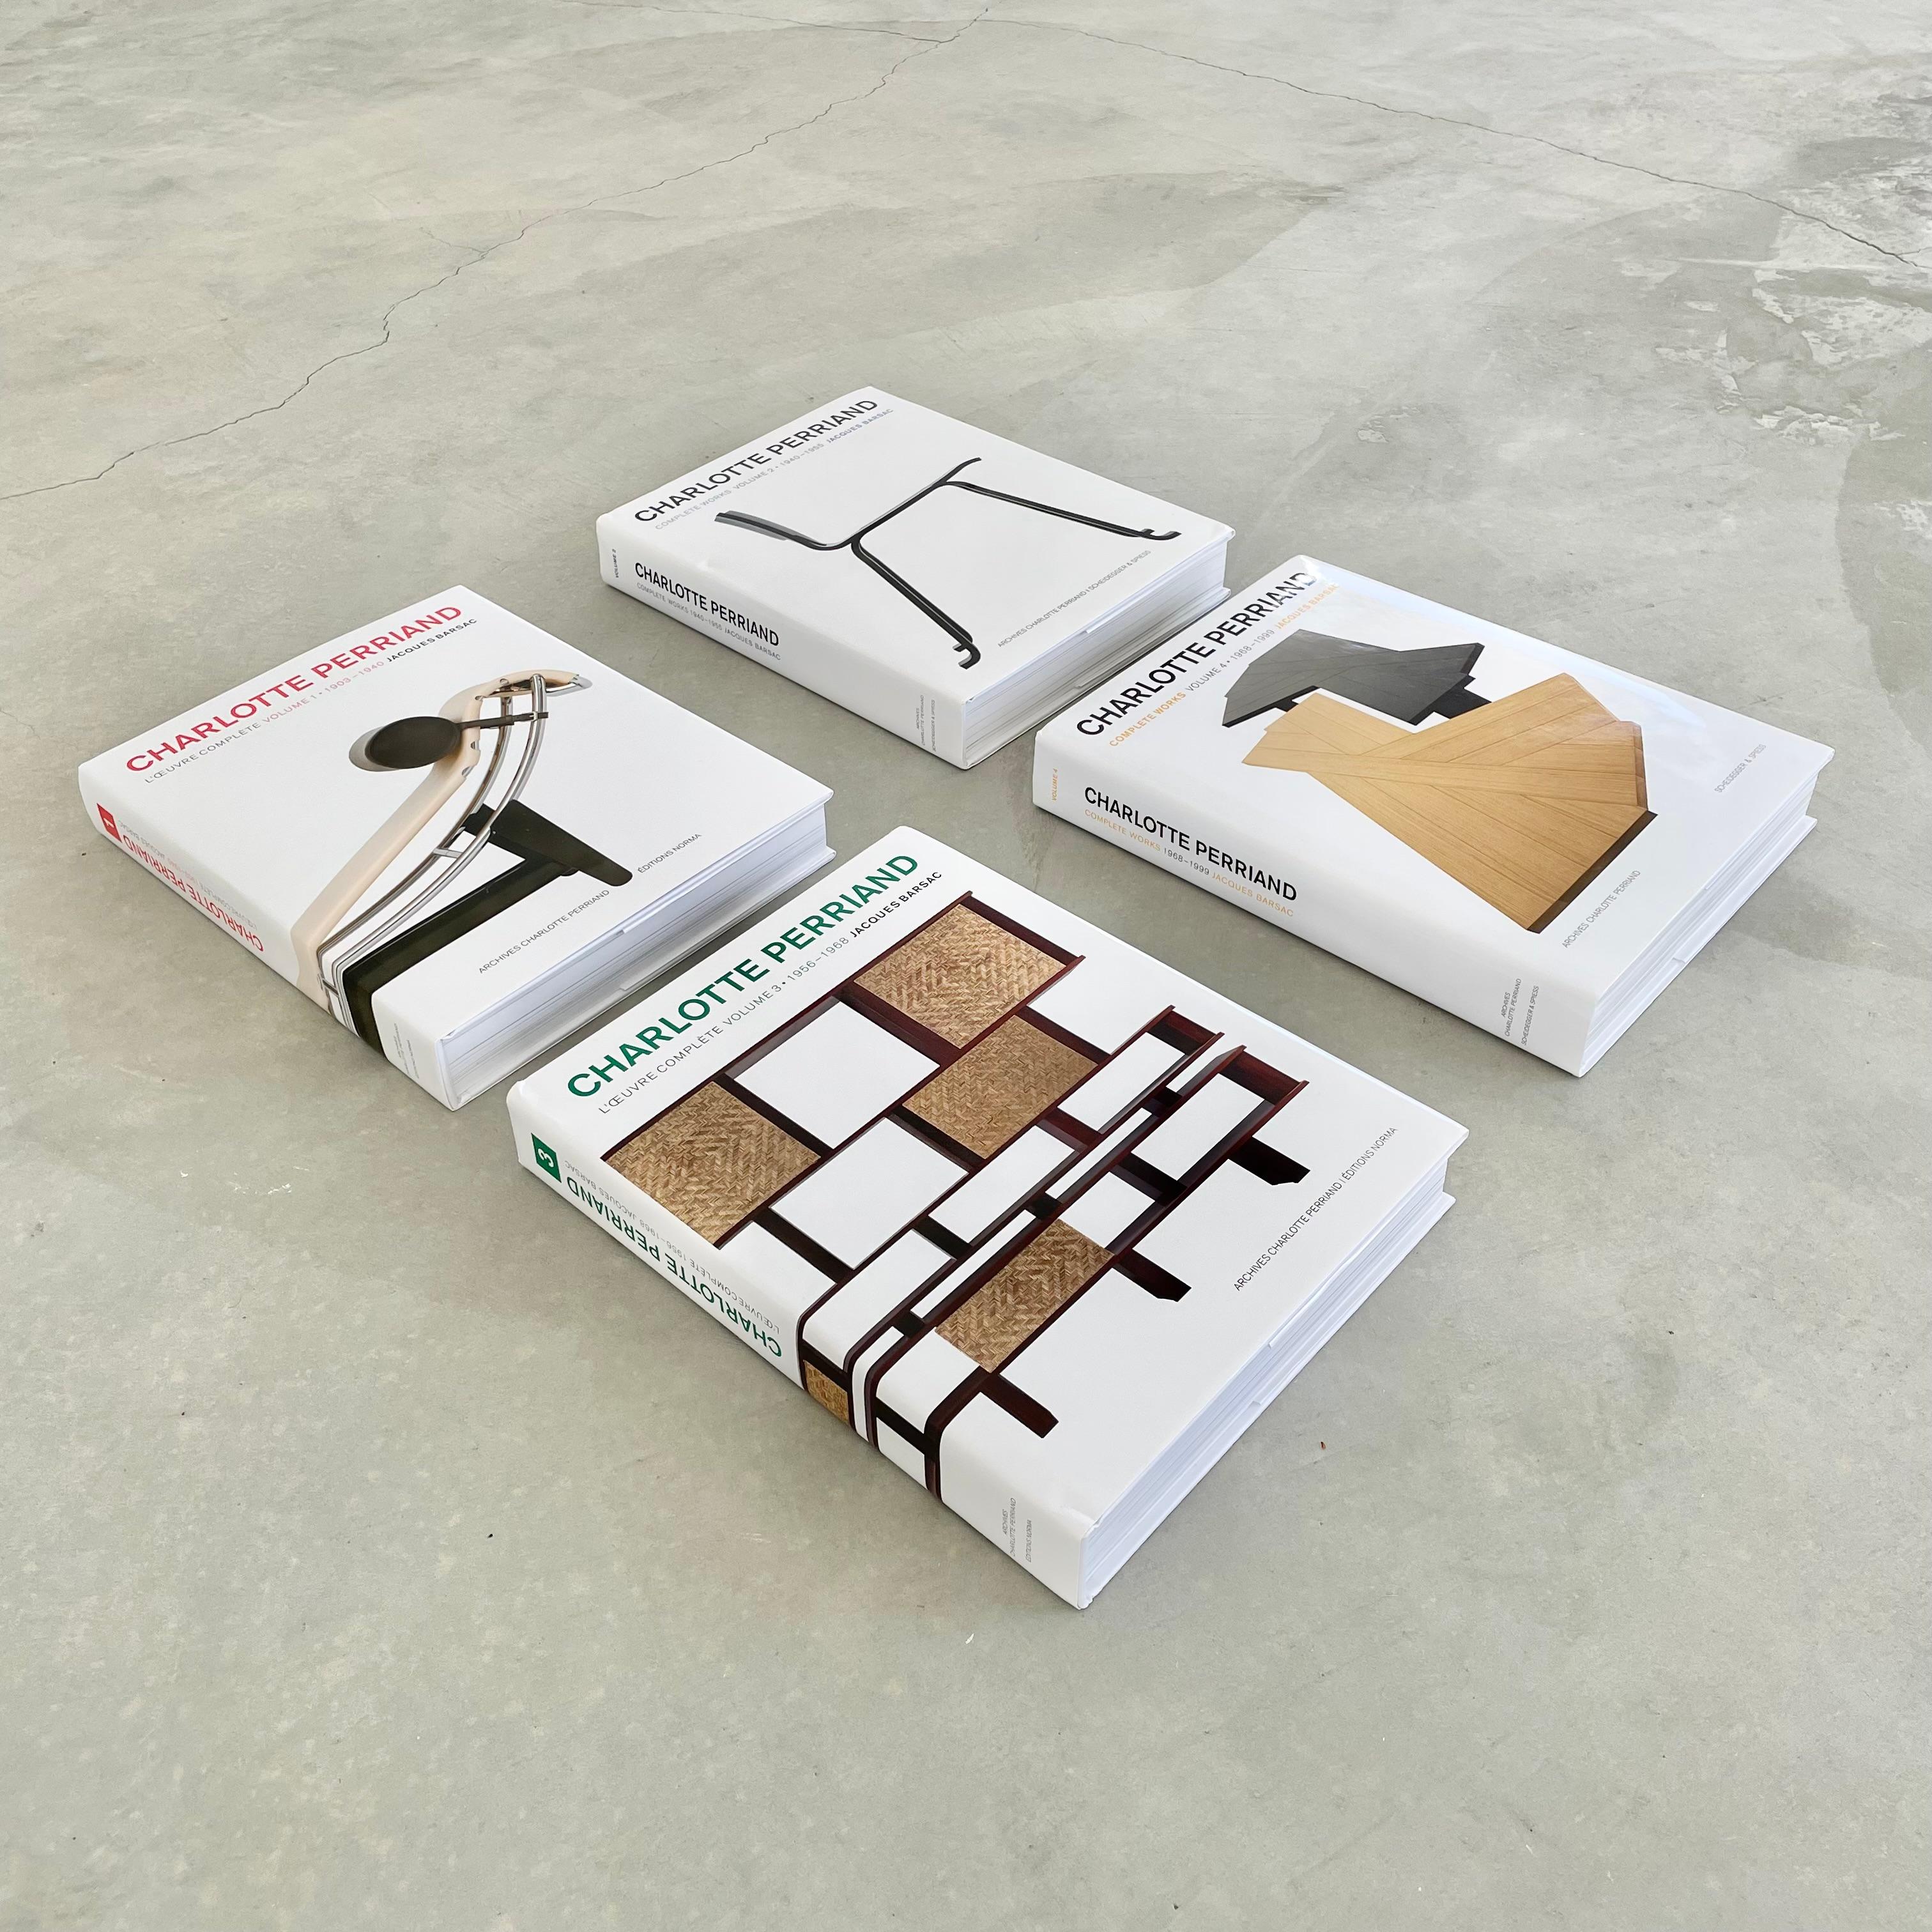 The complete works of Prolific French designer, Charlotte Perriand. Includes volumes 1-4 encompassing her life and works from 1903-1999. Volume 1 and 3 in French and Vol 2 and 4 in English. Incredible collection of furniture, inspiration and